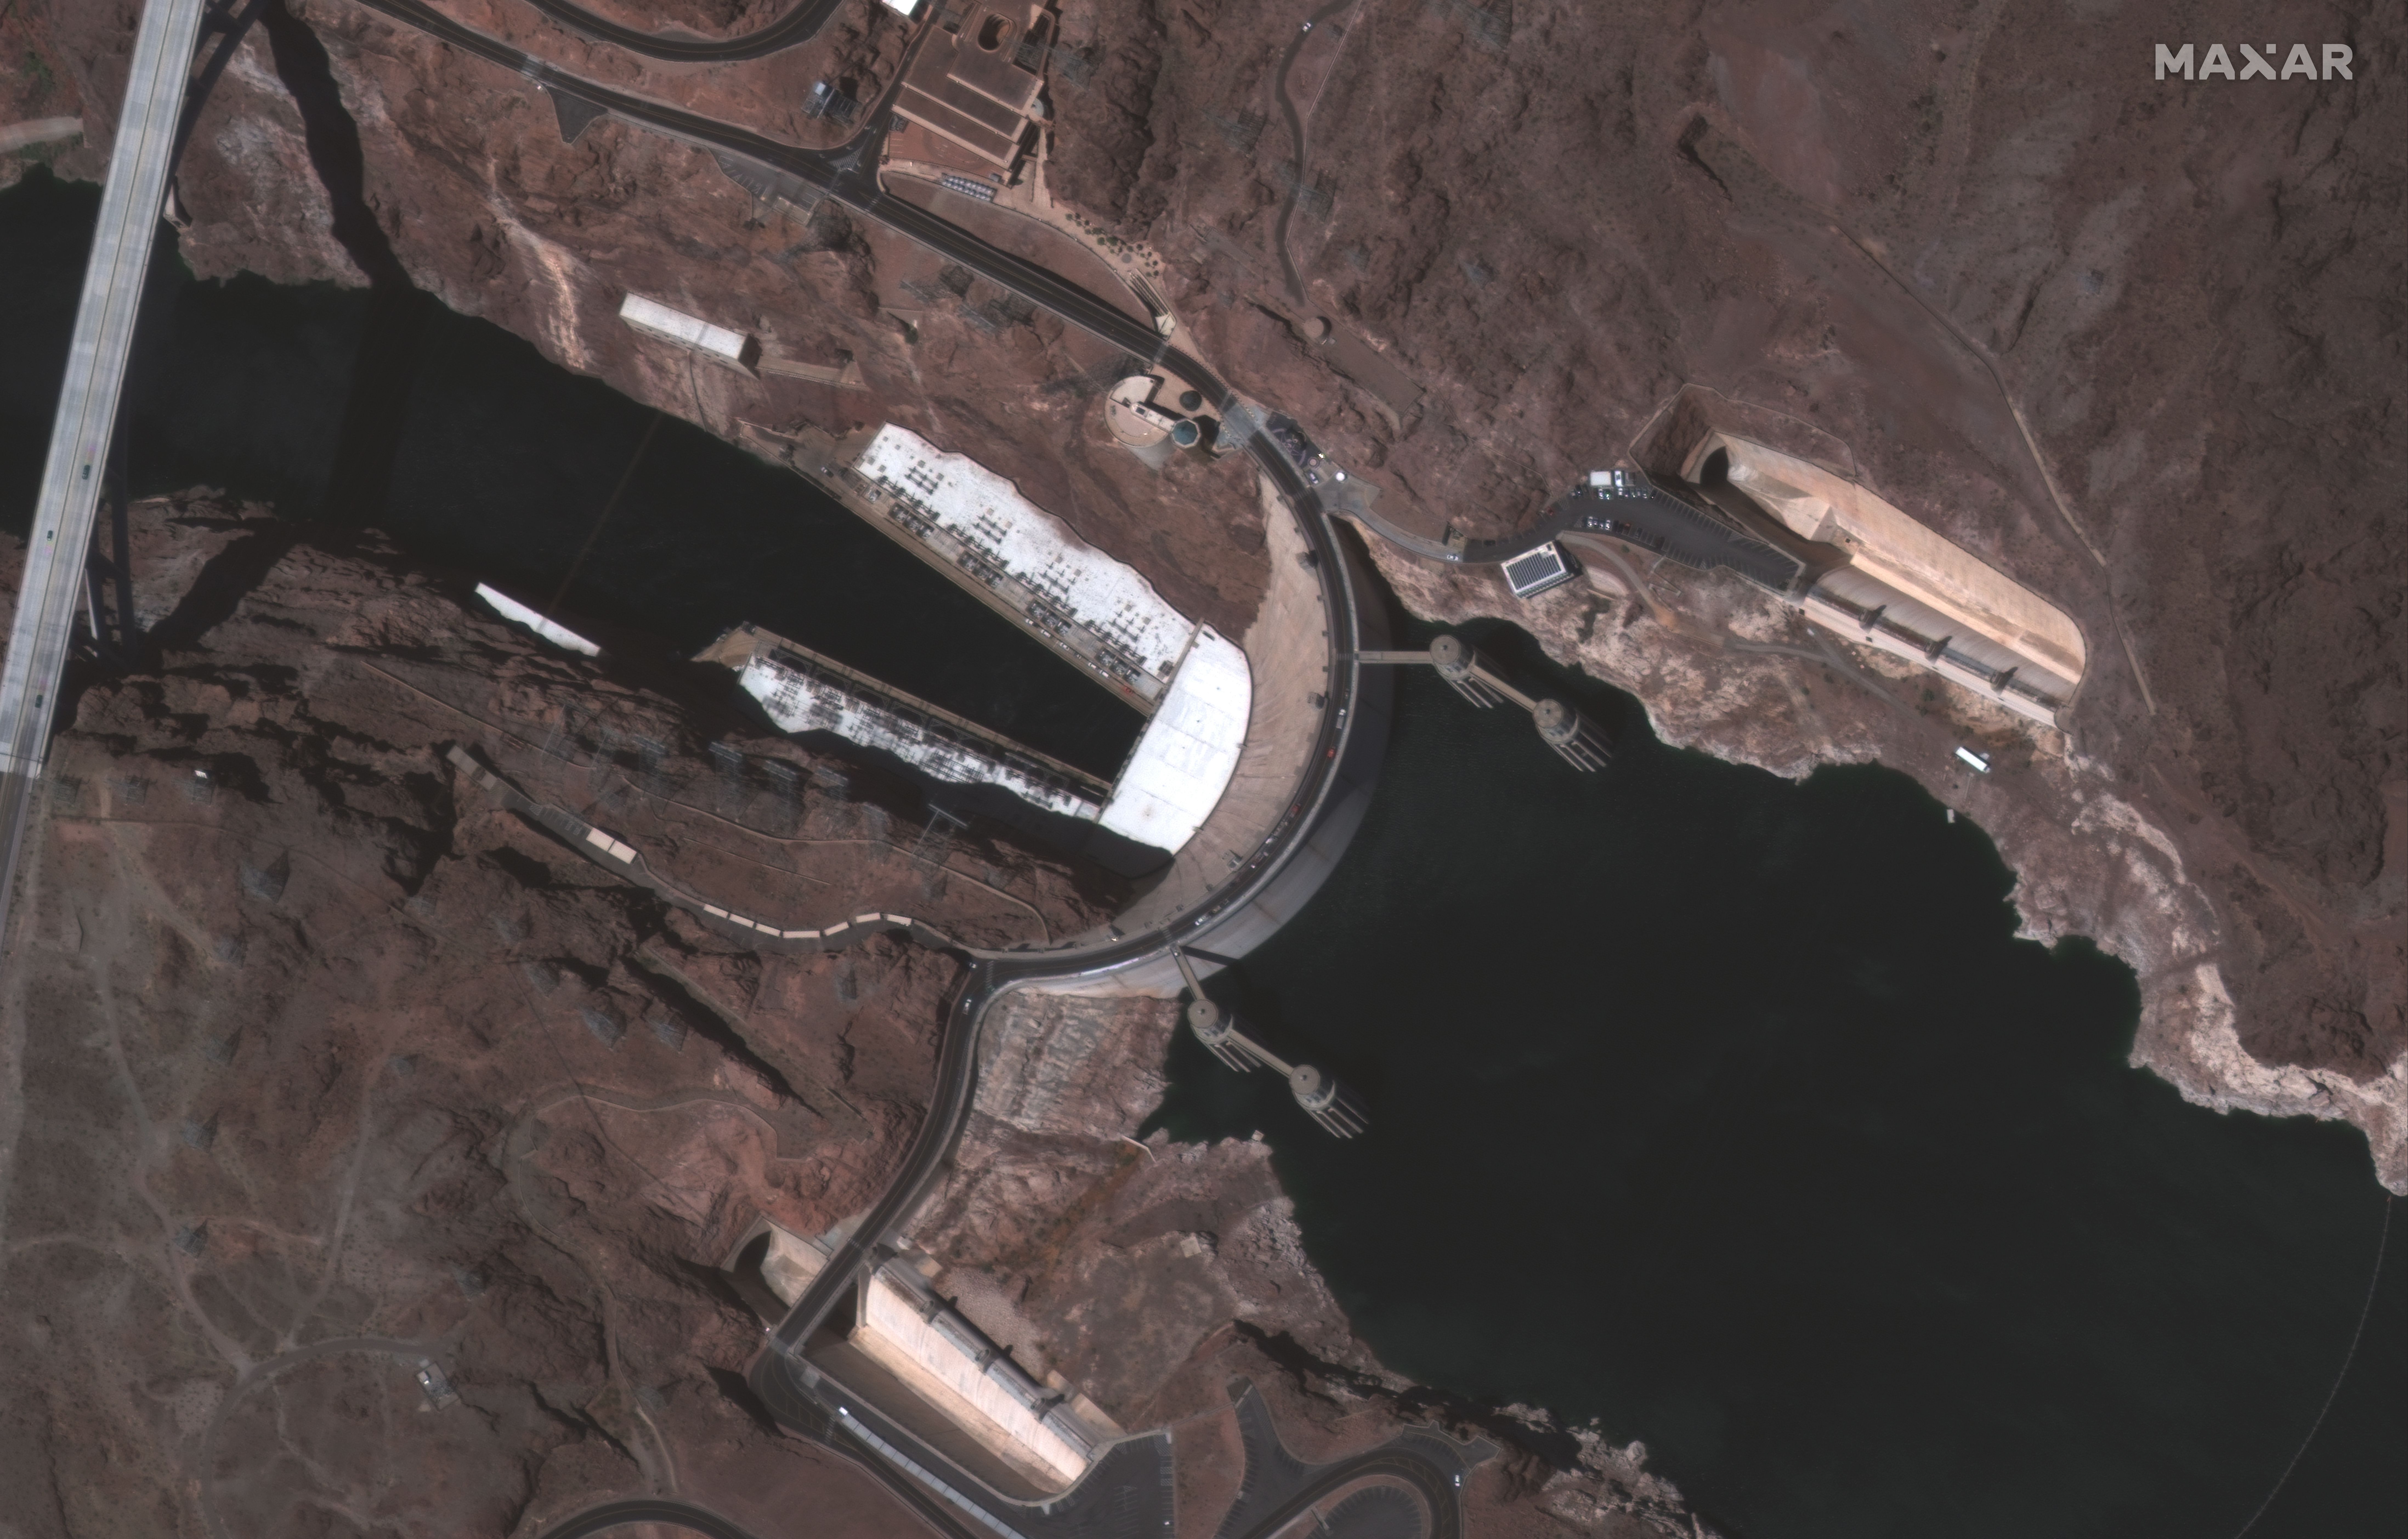 The Hoover Dam on July 27